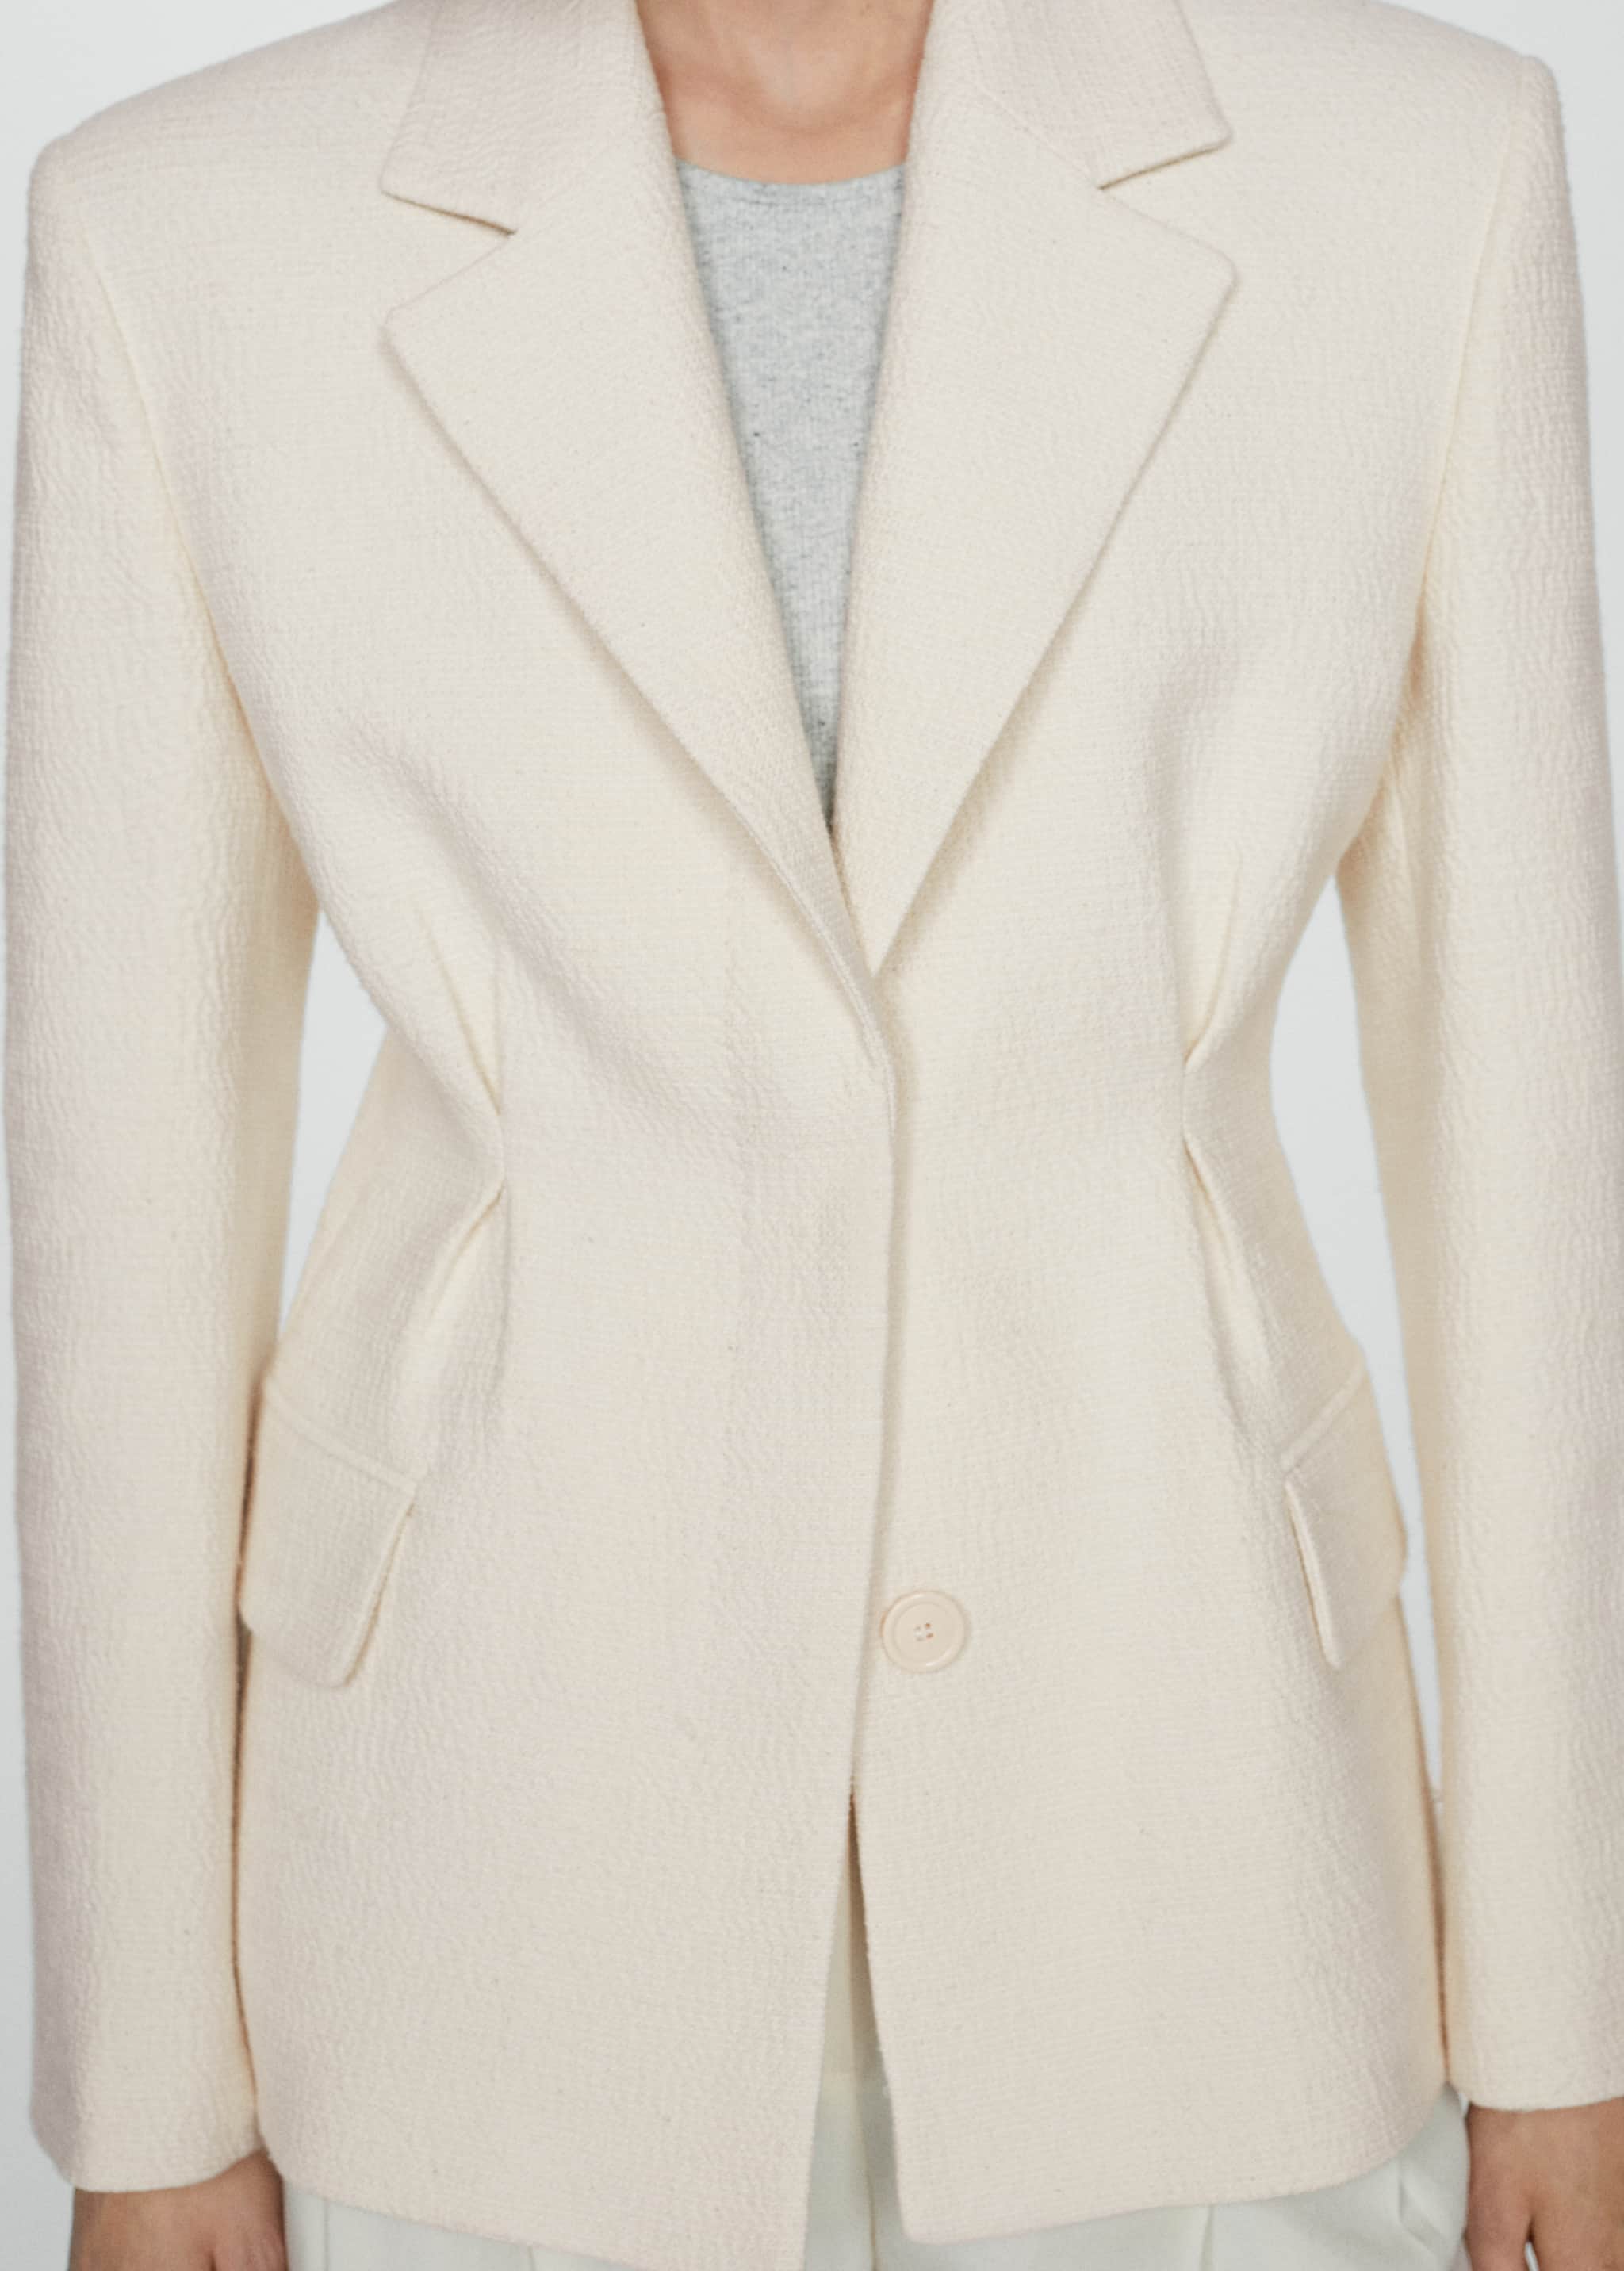 Textured blazer with darted detail - Details of the article 6